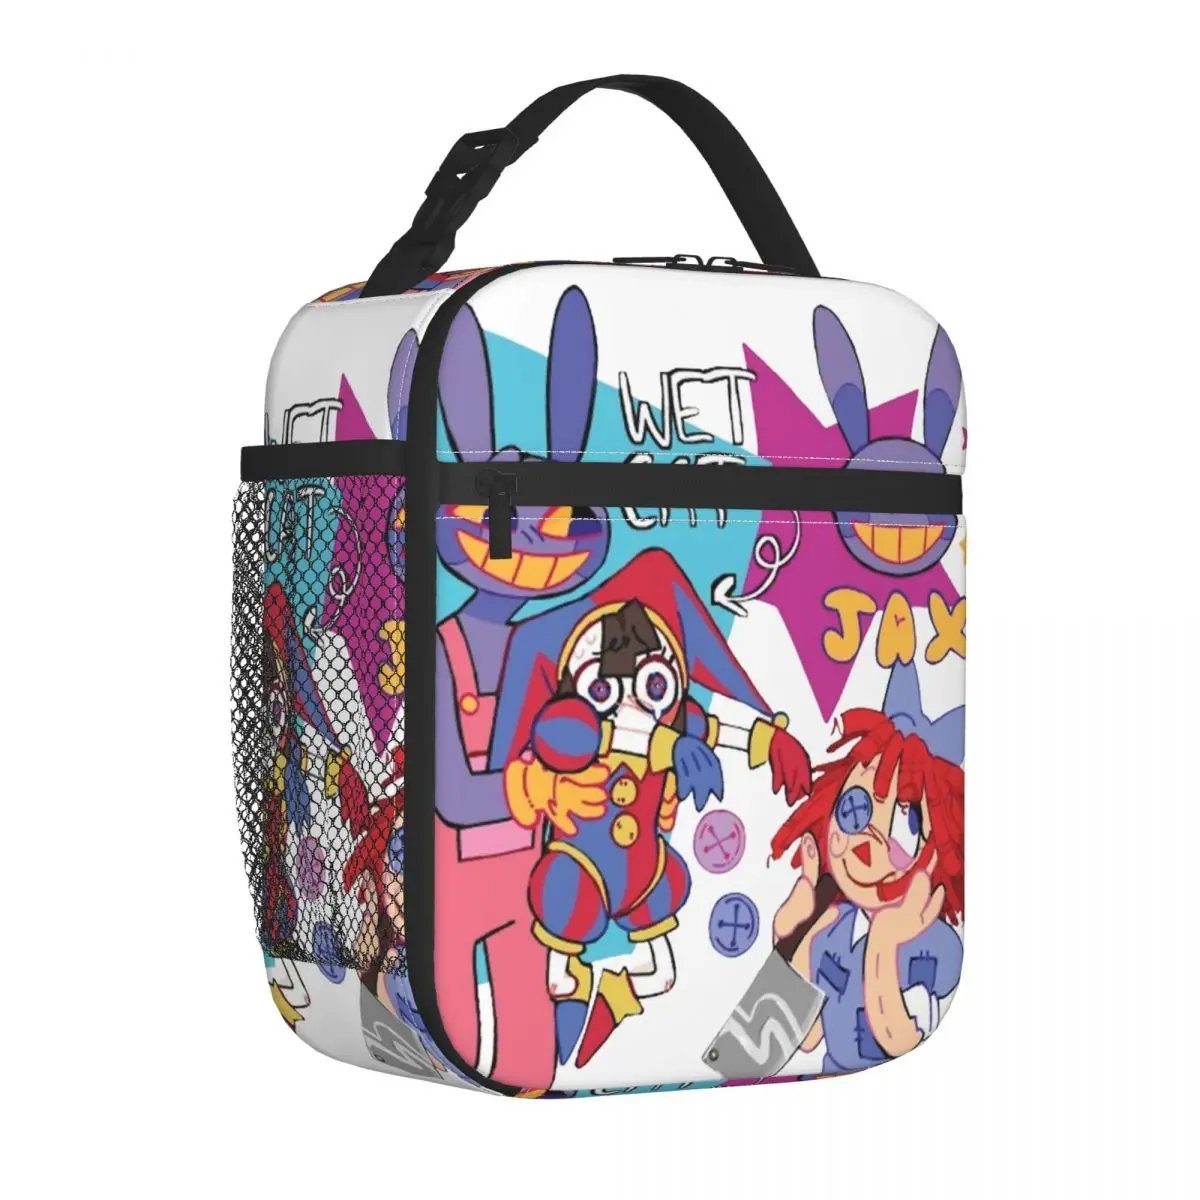 The Amazing Digital Circus Incredible Insulated Lunch Bags Pompom Pomni ...